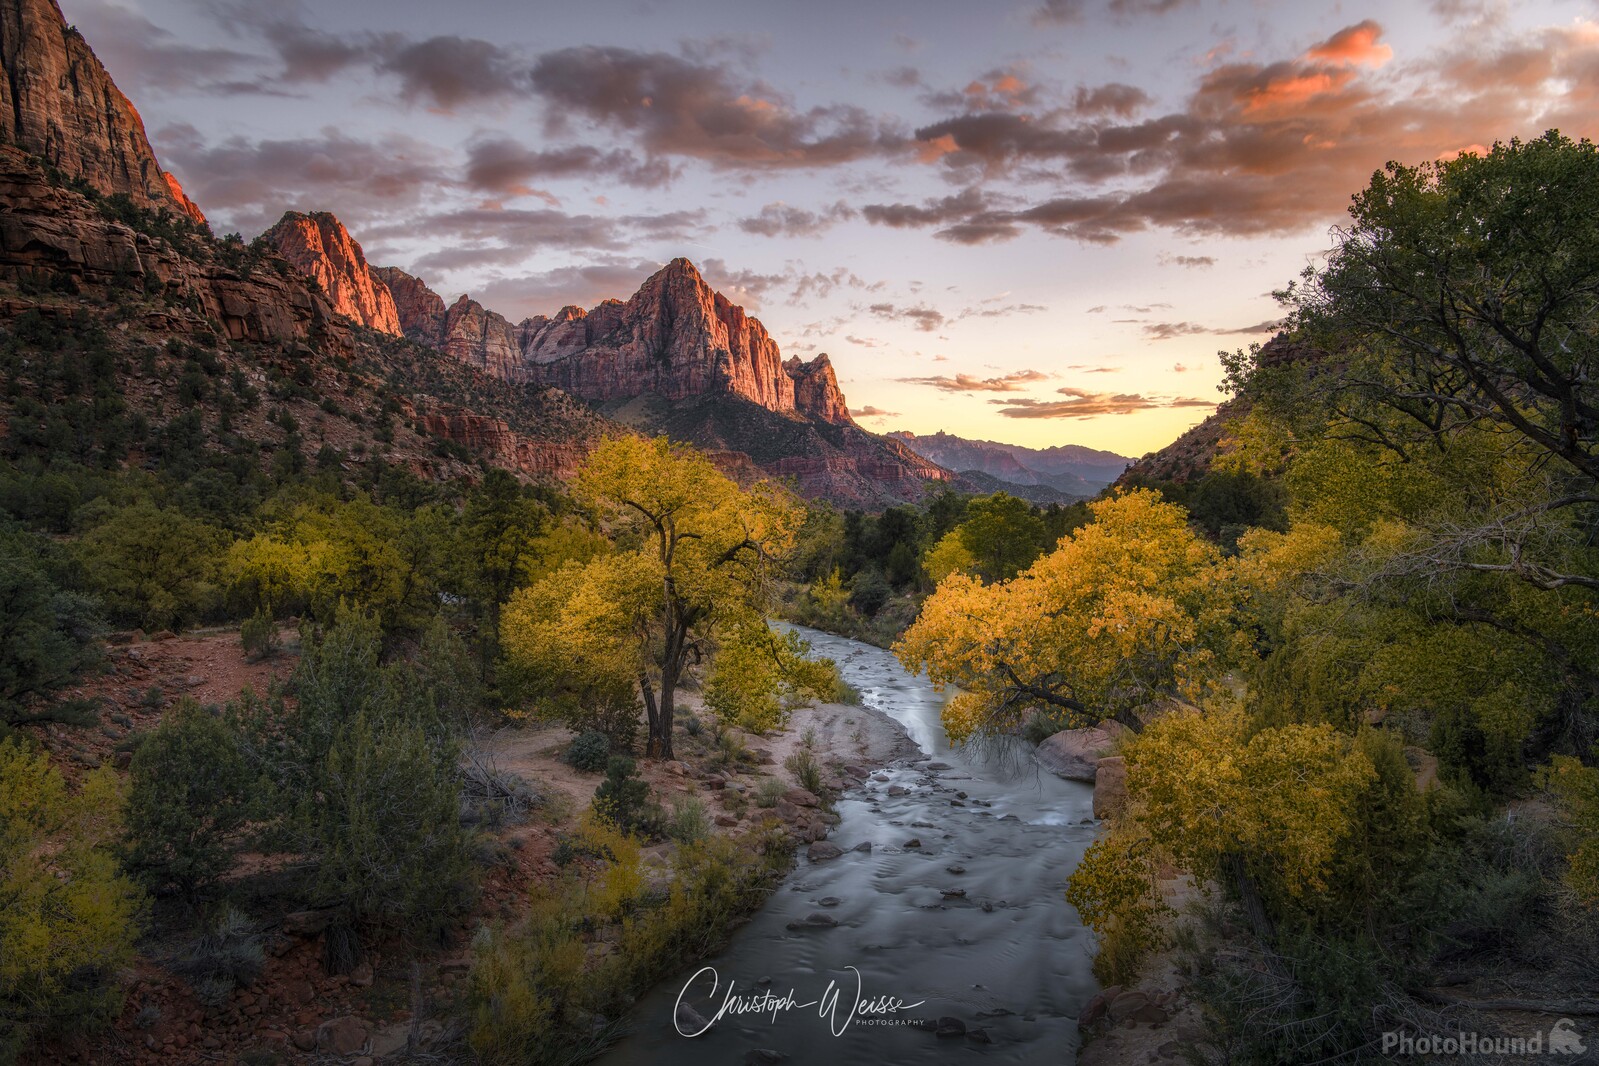 Image of The Watchman - View from the Bridge by Christoph Weisse